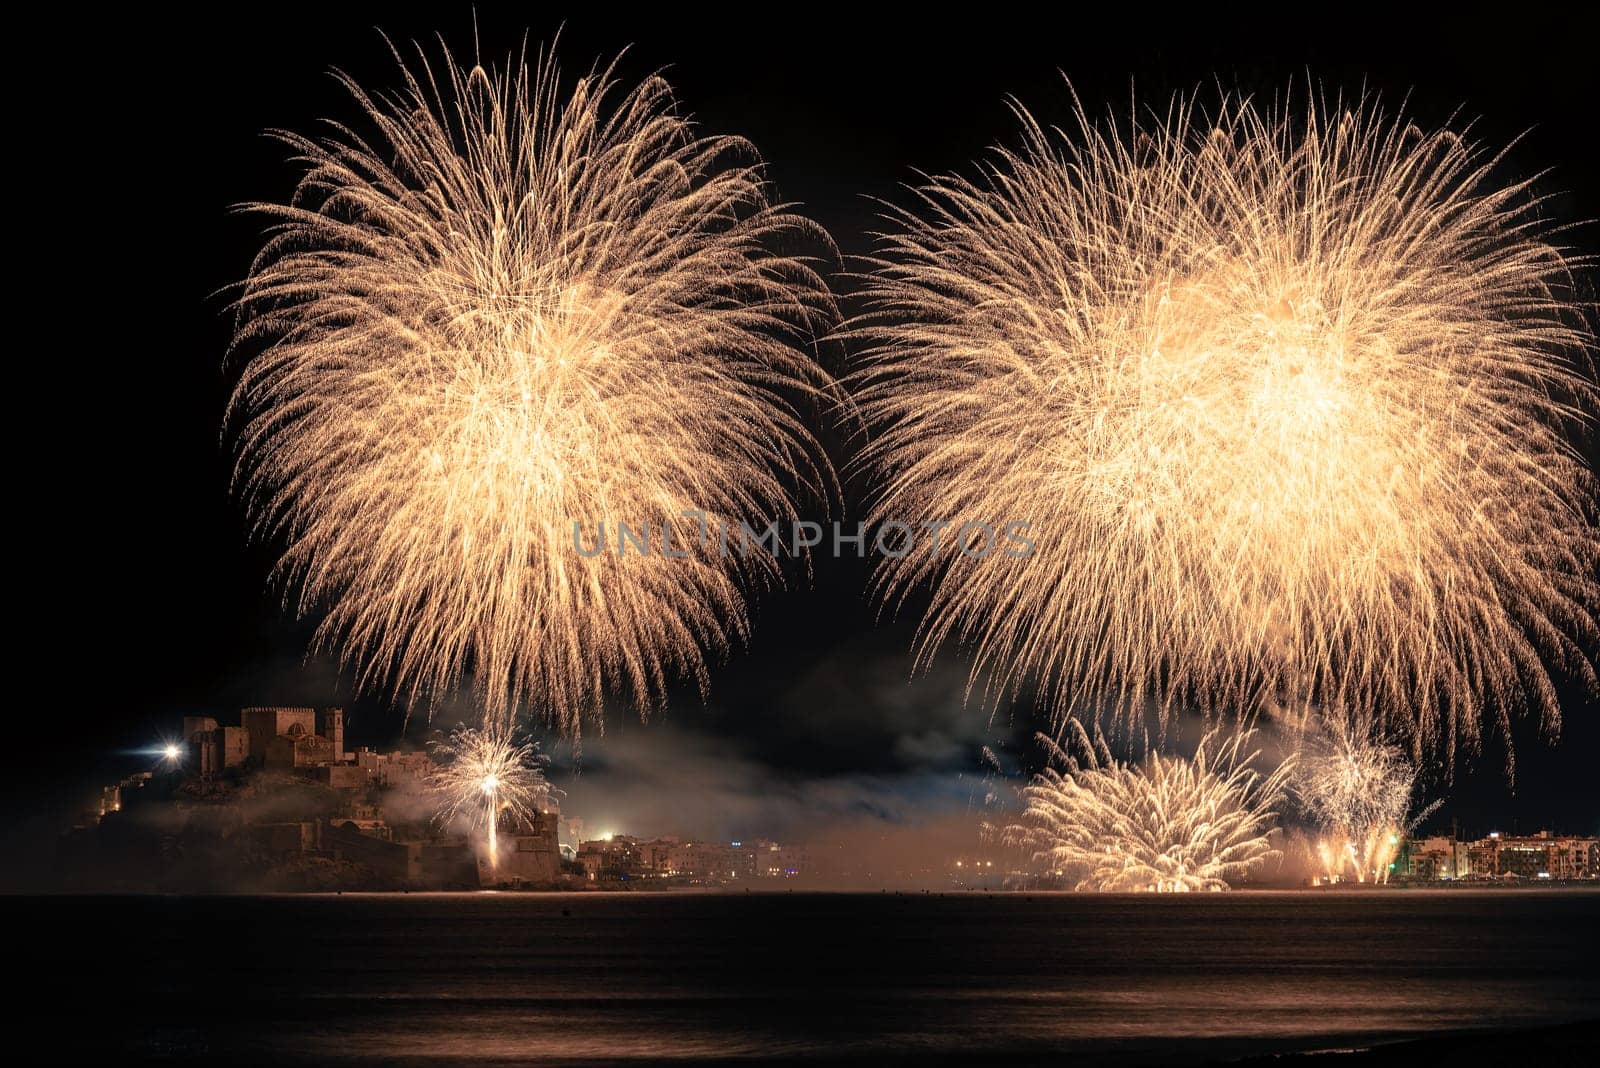 Peniscola Night Sky: Golden Fireworks Spectacle by raul_ruiz